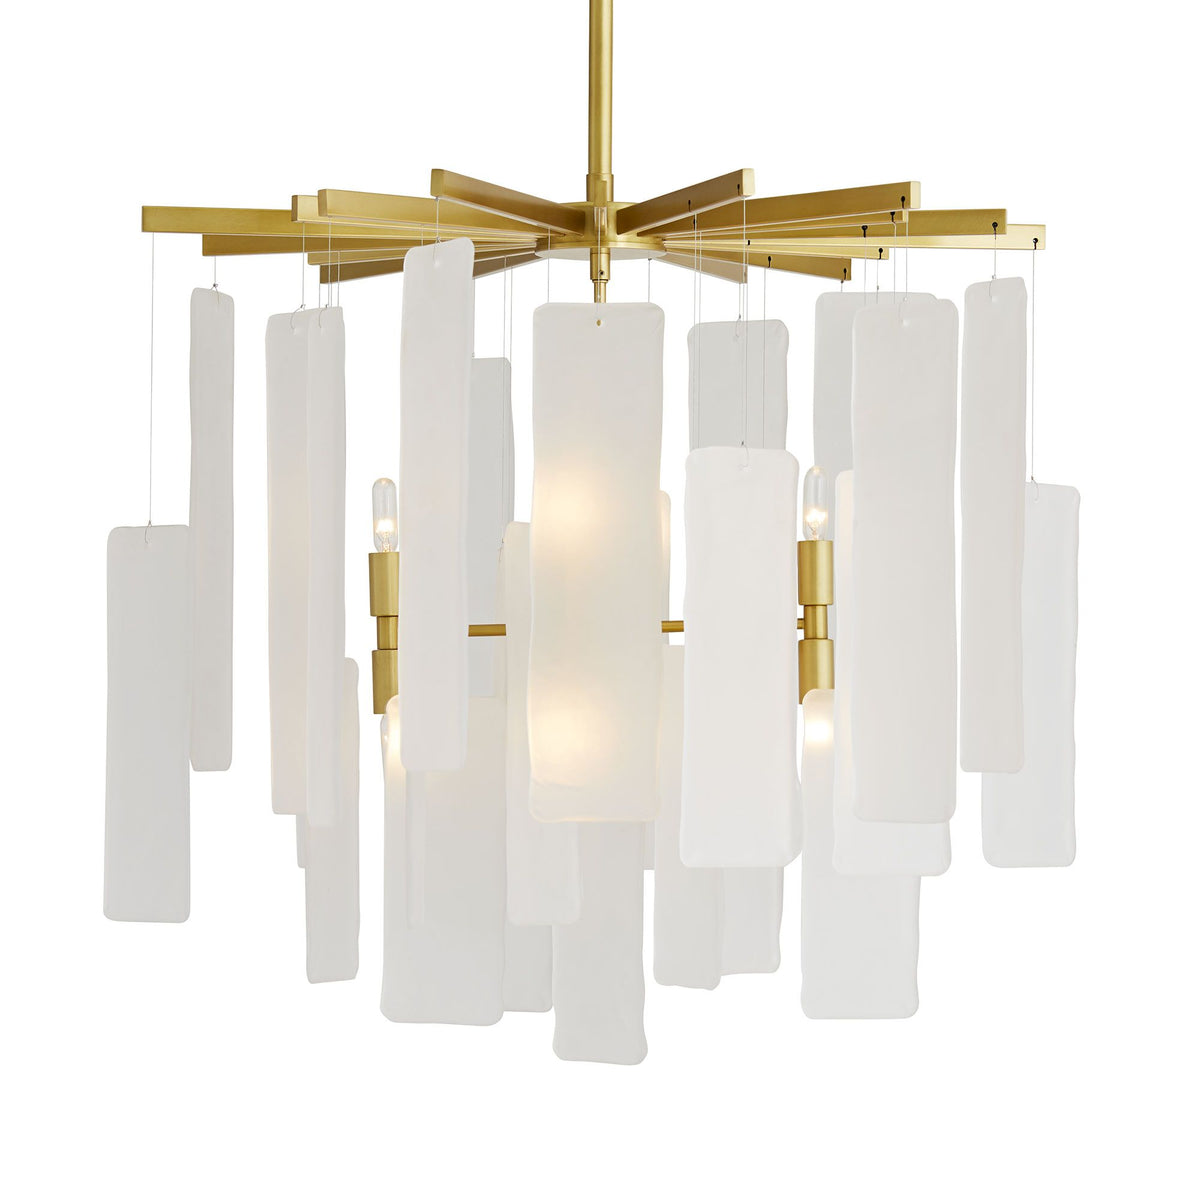 Tulsa Antique Brass and Frosted Glass Chandelier